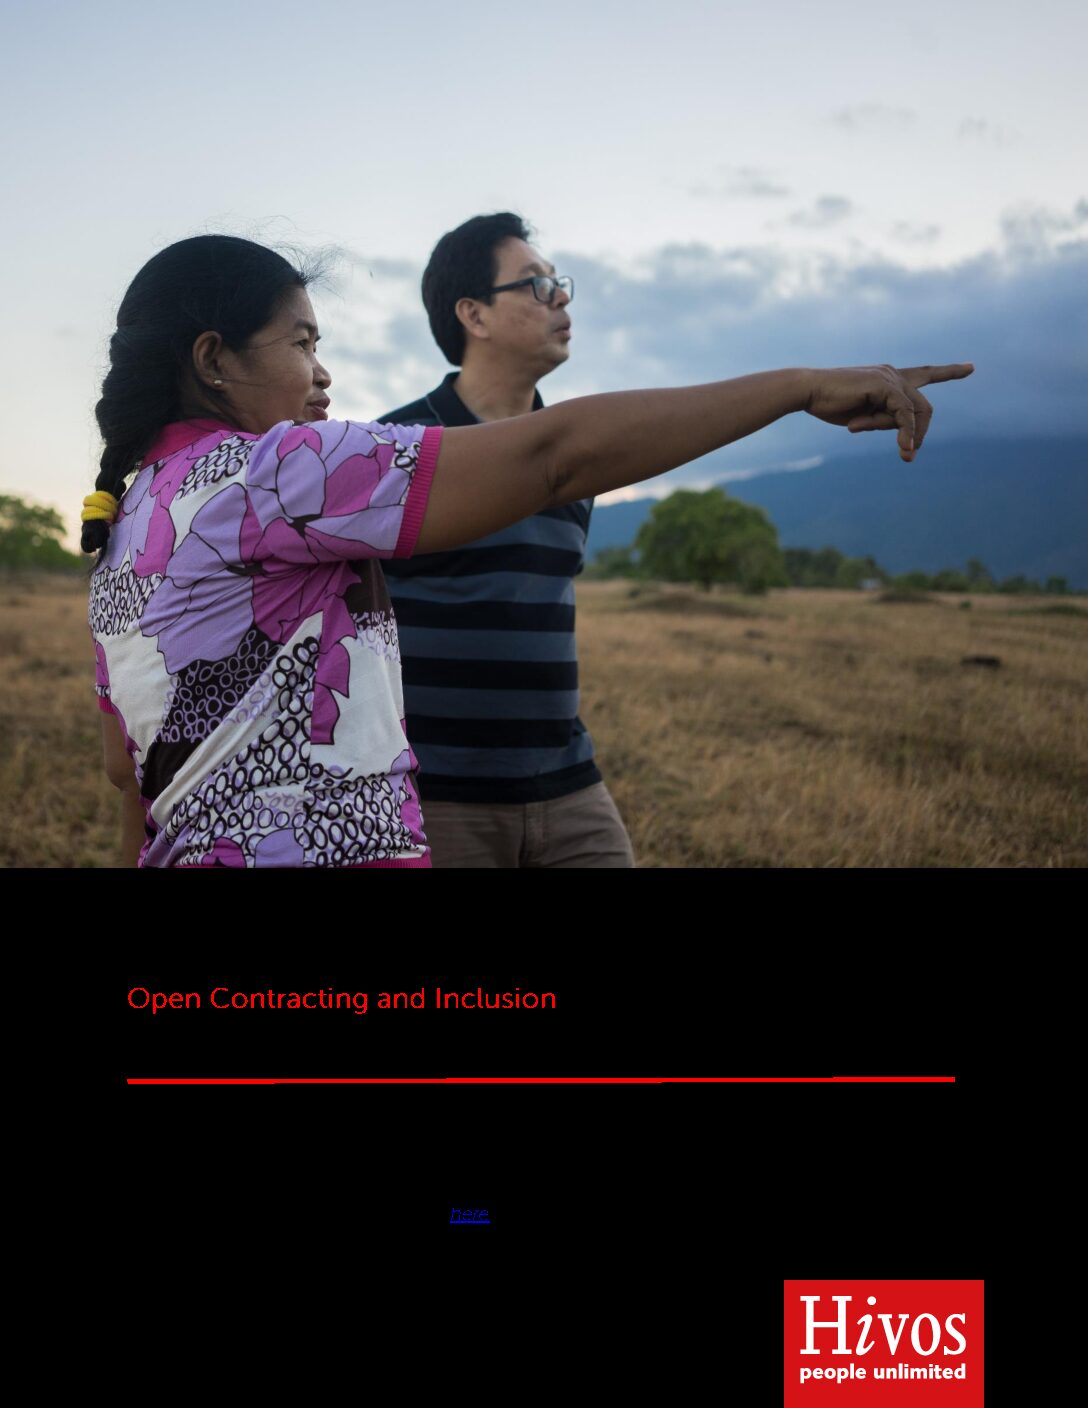 Open Contracting and Inclusion: Bantay Kita, Philippines